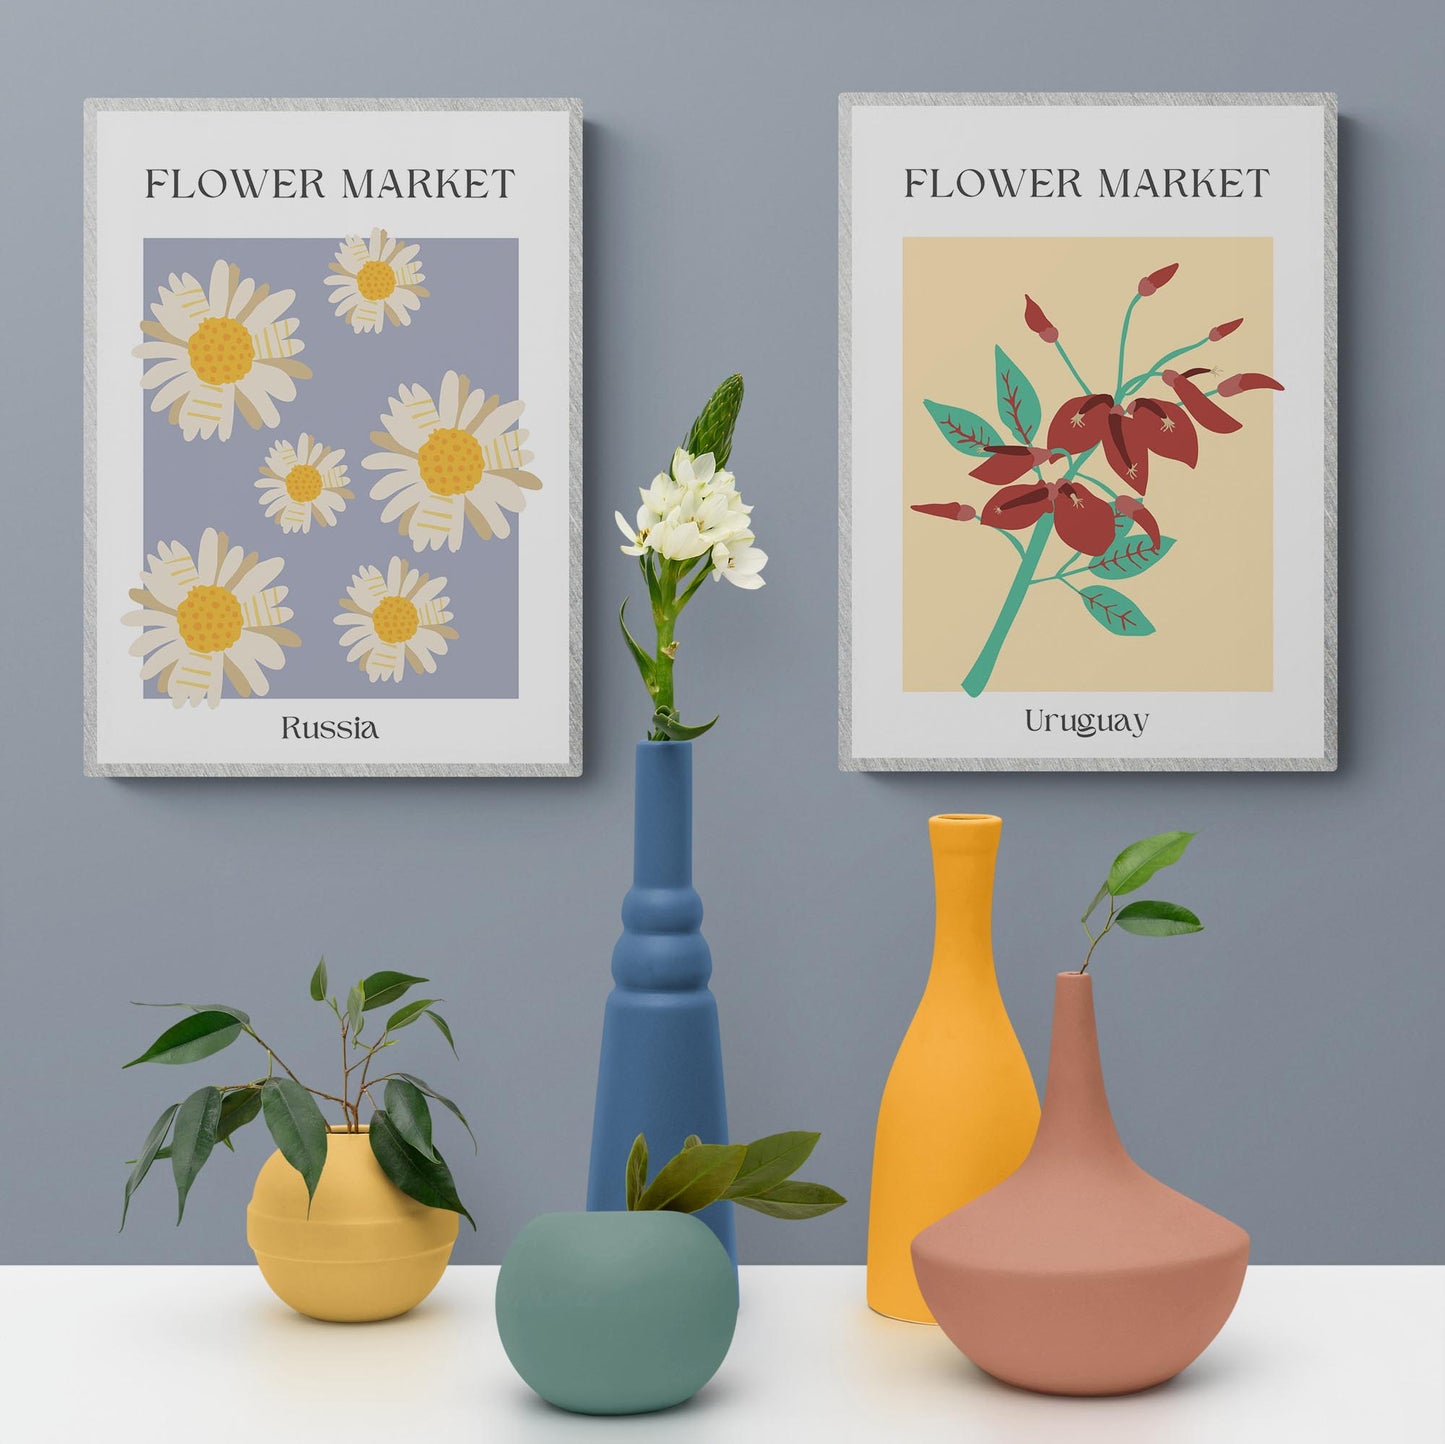 Create a unique interior style with the Colombia Flowers Market Print! With prints specifically designed to fit the living room, kitchen, and bedroom, this print offers a variety of wall art ideas for any space. Bring your gallery wall to life with art prints from our poster shop, featuring large kitchen prints, art for living room walls, and designer prints for the wall.